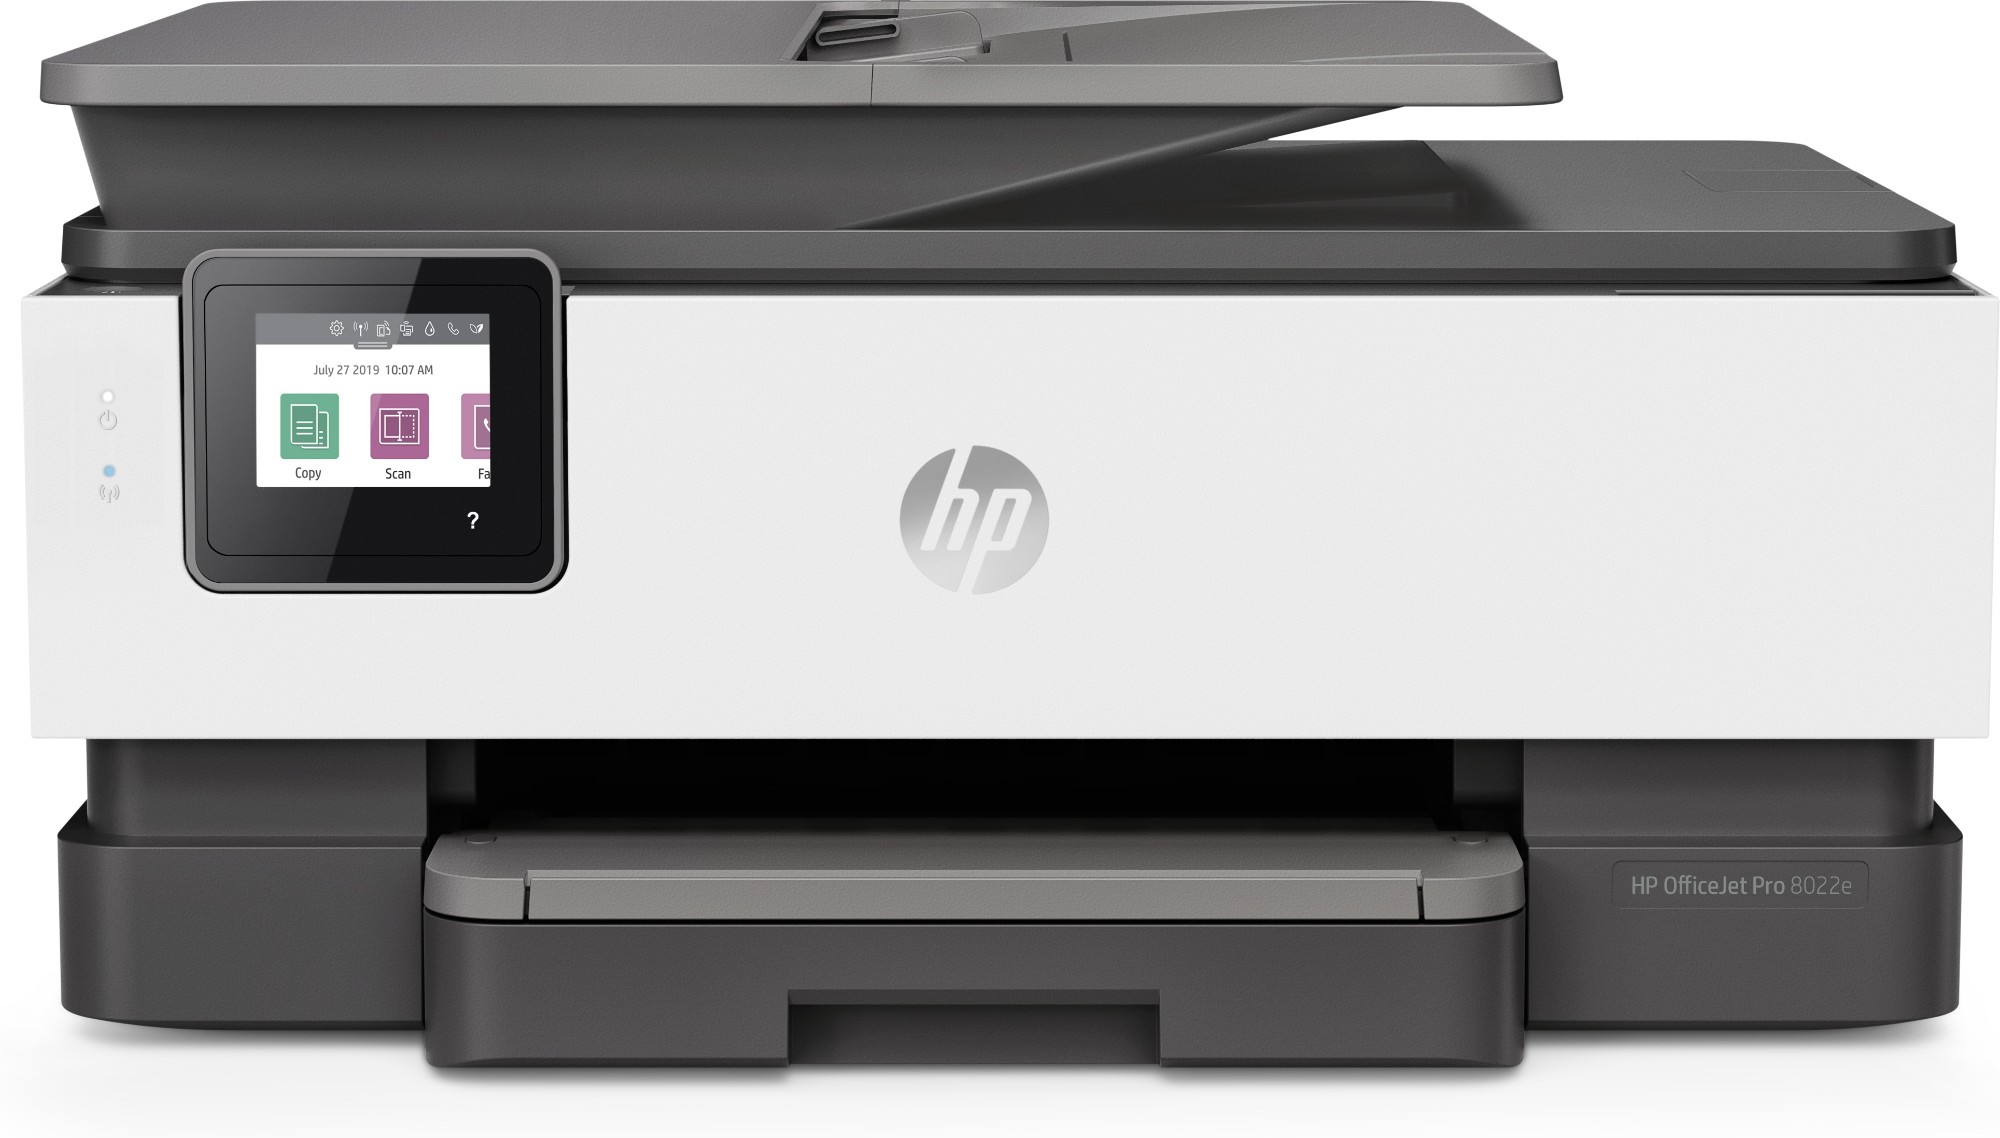 HP OfficeJet Pro HP 8022e All-in-One Printer, Colour, Printer for Home, Print, copy, scan, fax, HP+; HP Instant Ink eligible; Automatic document feeder; Two-sided printing